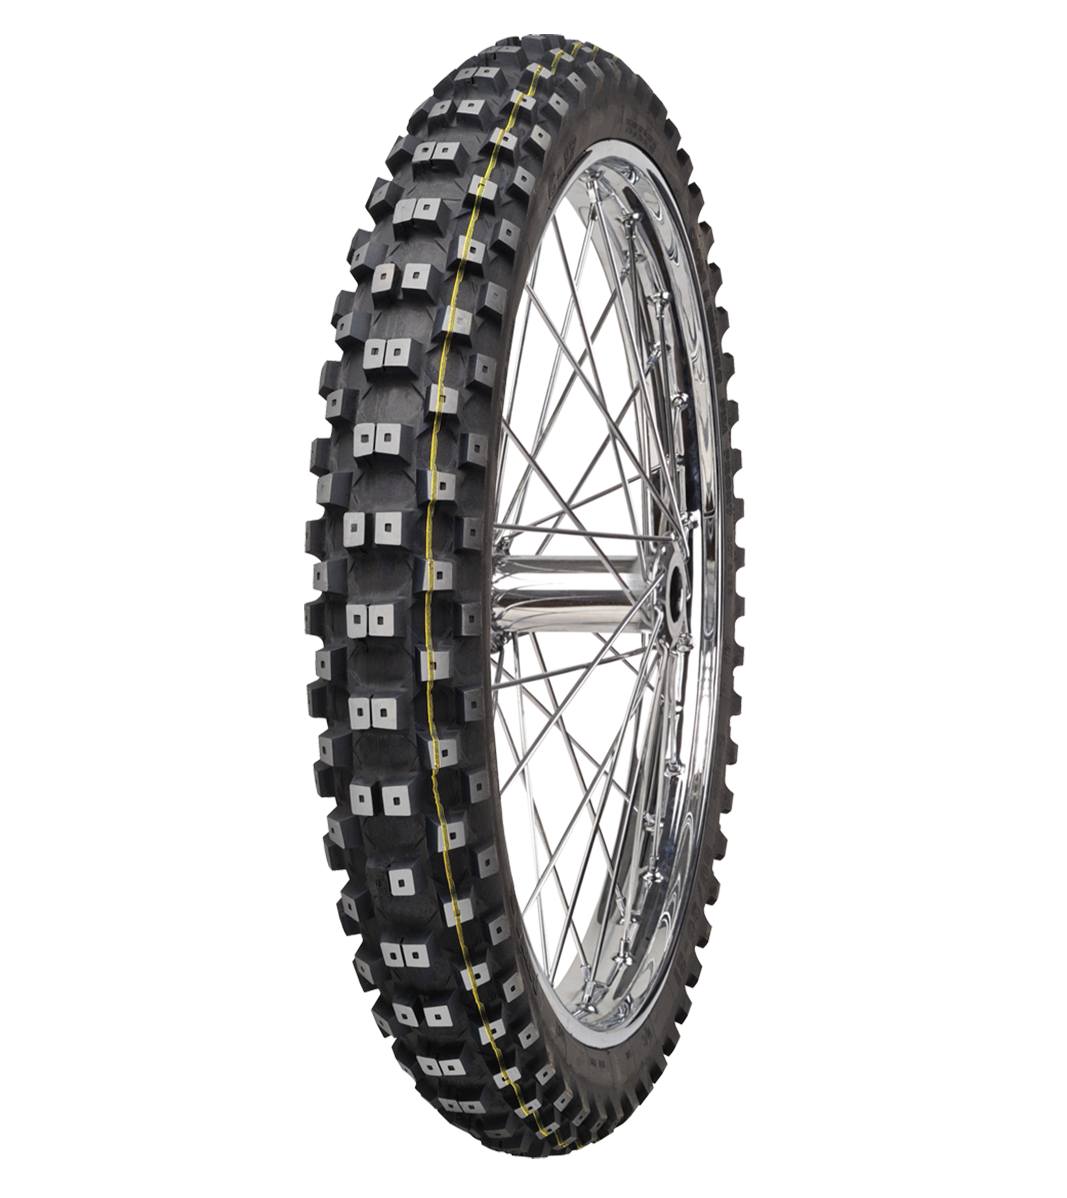 Mitas C-17 STONEATER 90/90-21 Trail OFF Trail DAKAR 54R Yellow Tube Front Tire, 226705, 90/90-21, C-17 StonEater, Front, Trail, Trail OFF, Tires - Imported and distributed in North & South America by Lindeco Genuine Powersports - Premier Powersports Equipment and Accessories for Motorcycle Enthusiasts, Professional Riders and Dealers.